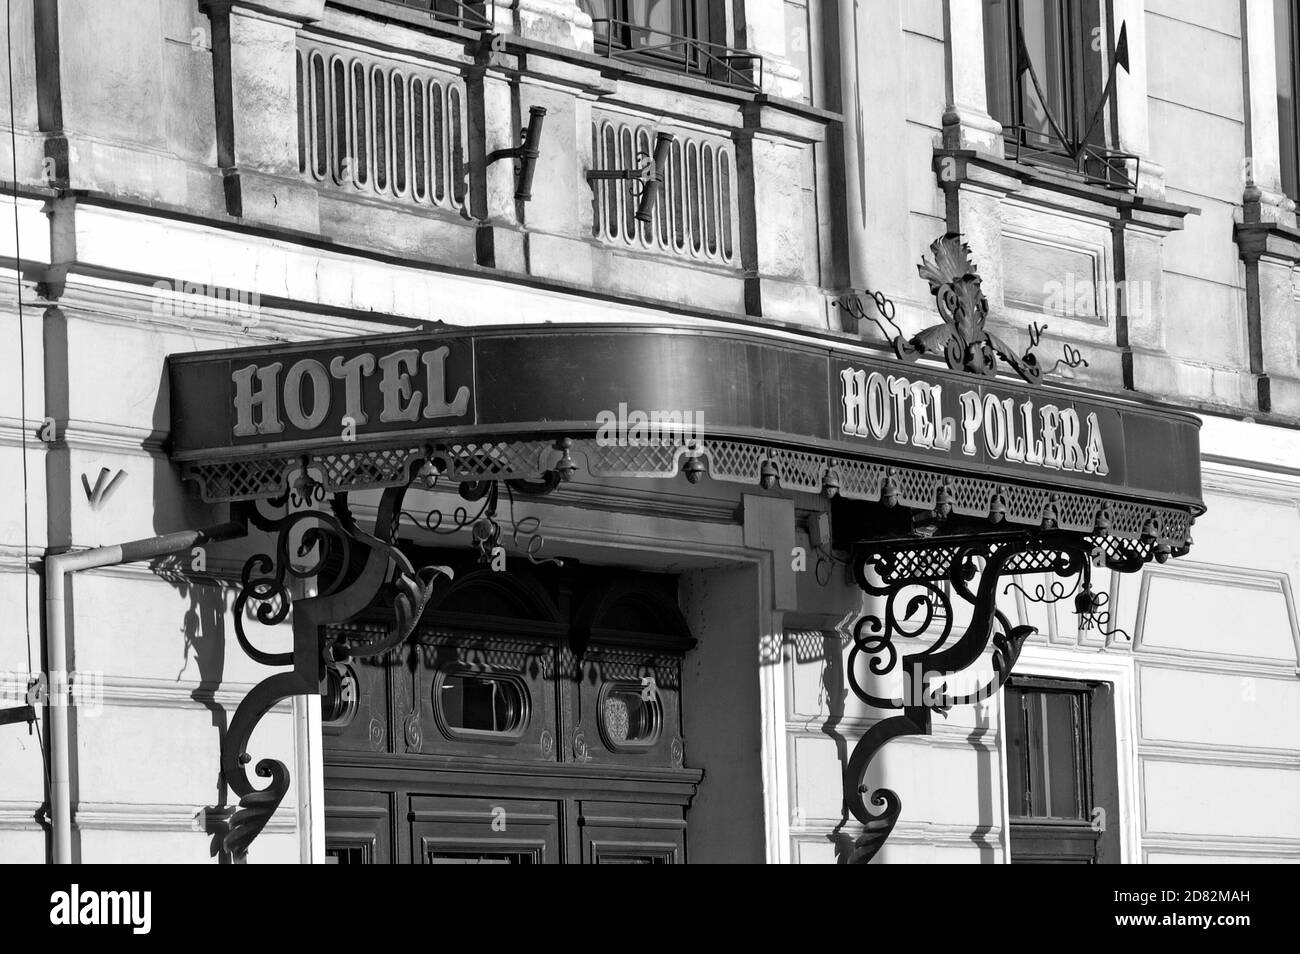 The Hotel Pollera, located on Szpitalna near the Old Town in Krakow, Poland has been in operation since 1834.  The hotel has a rich history. Stock Photo